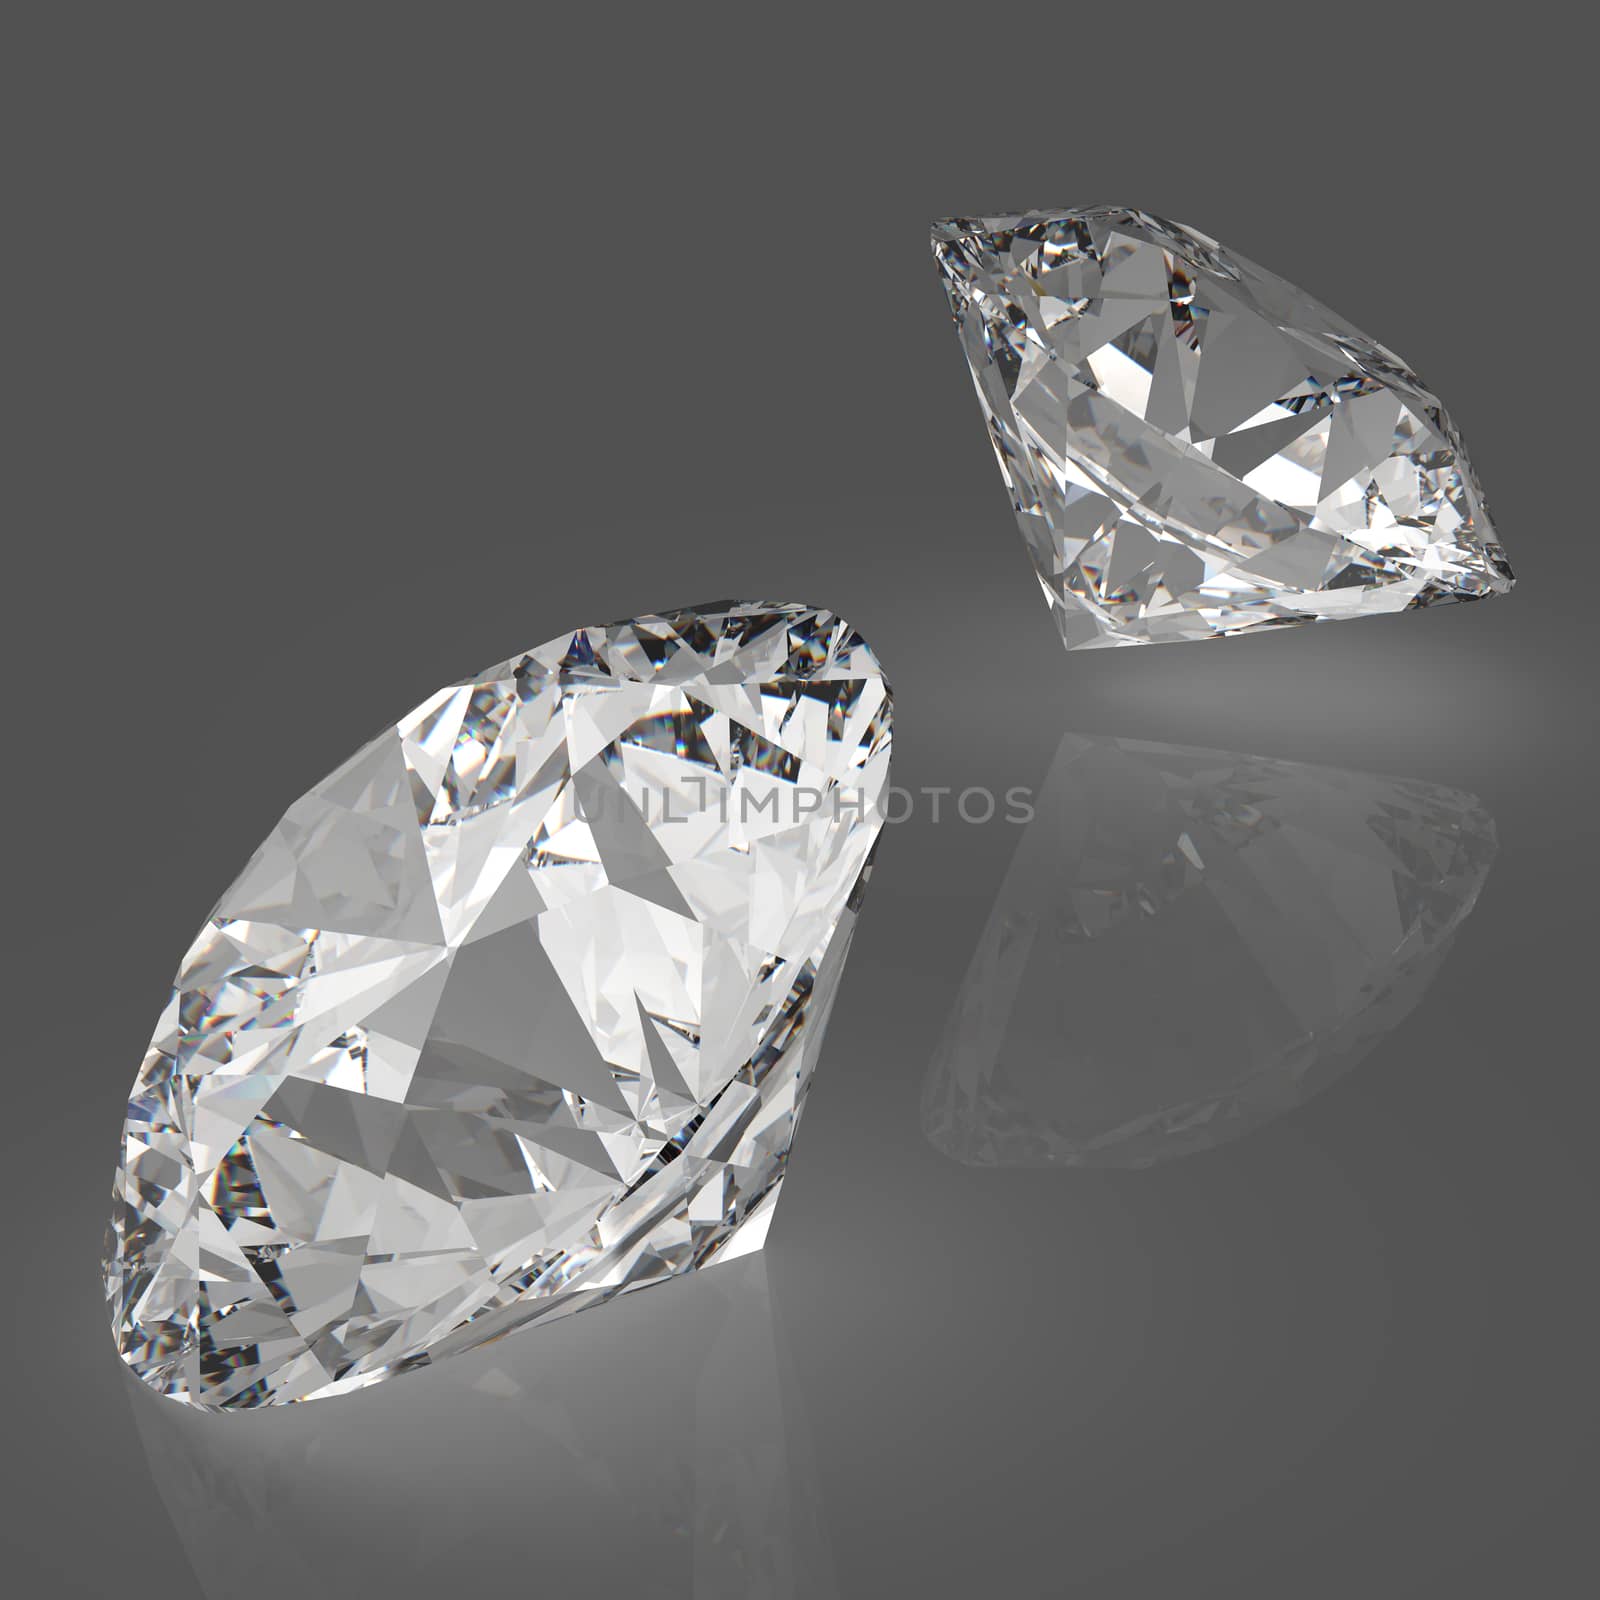 Diamonds 3d model in composition as concept by everythingpossible